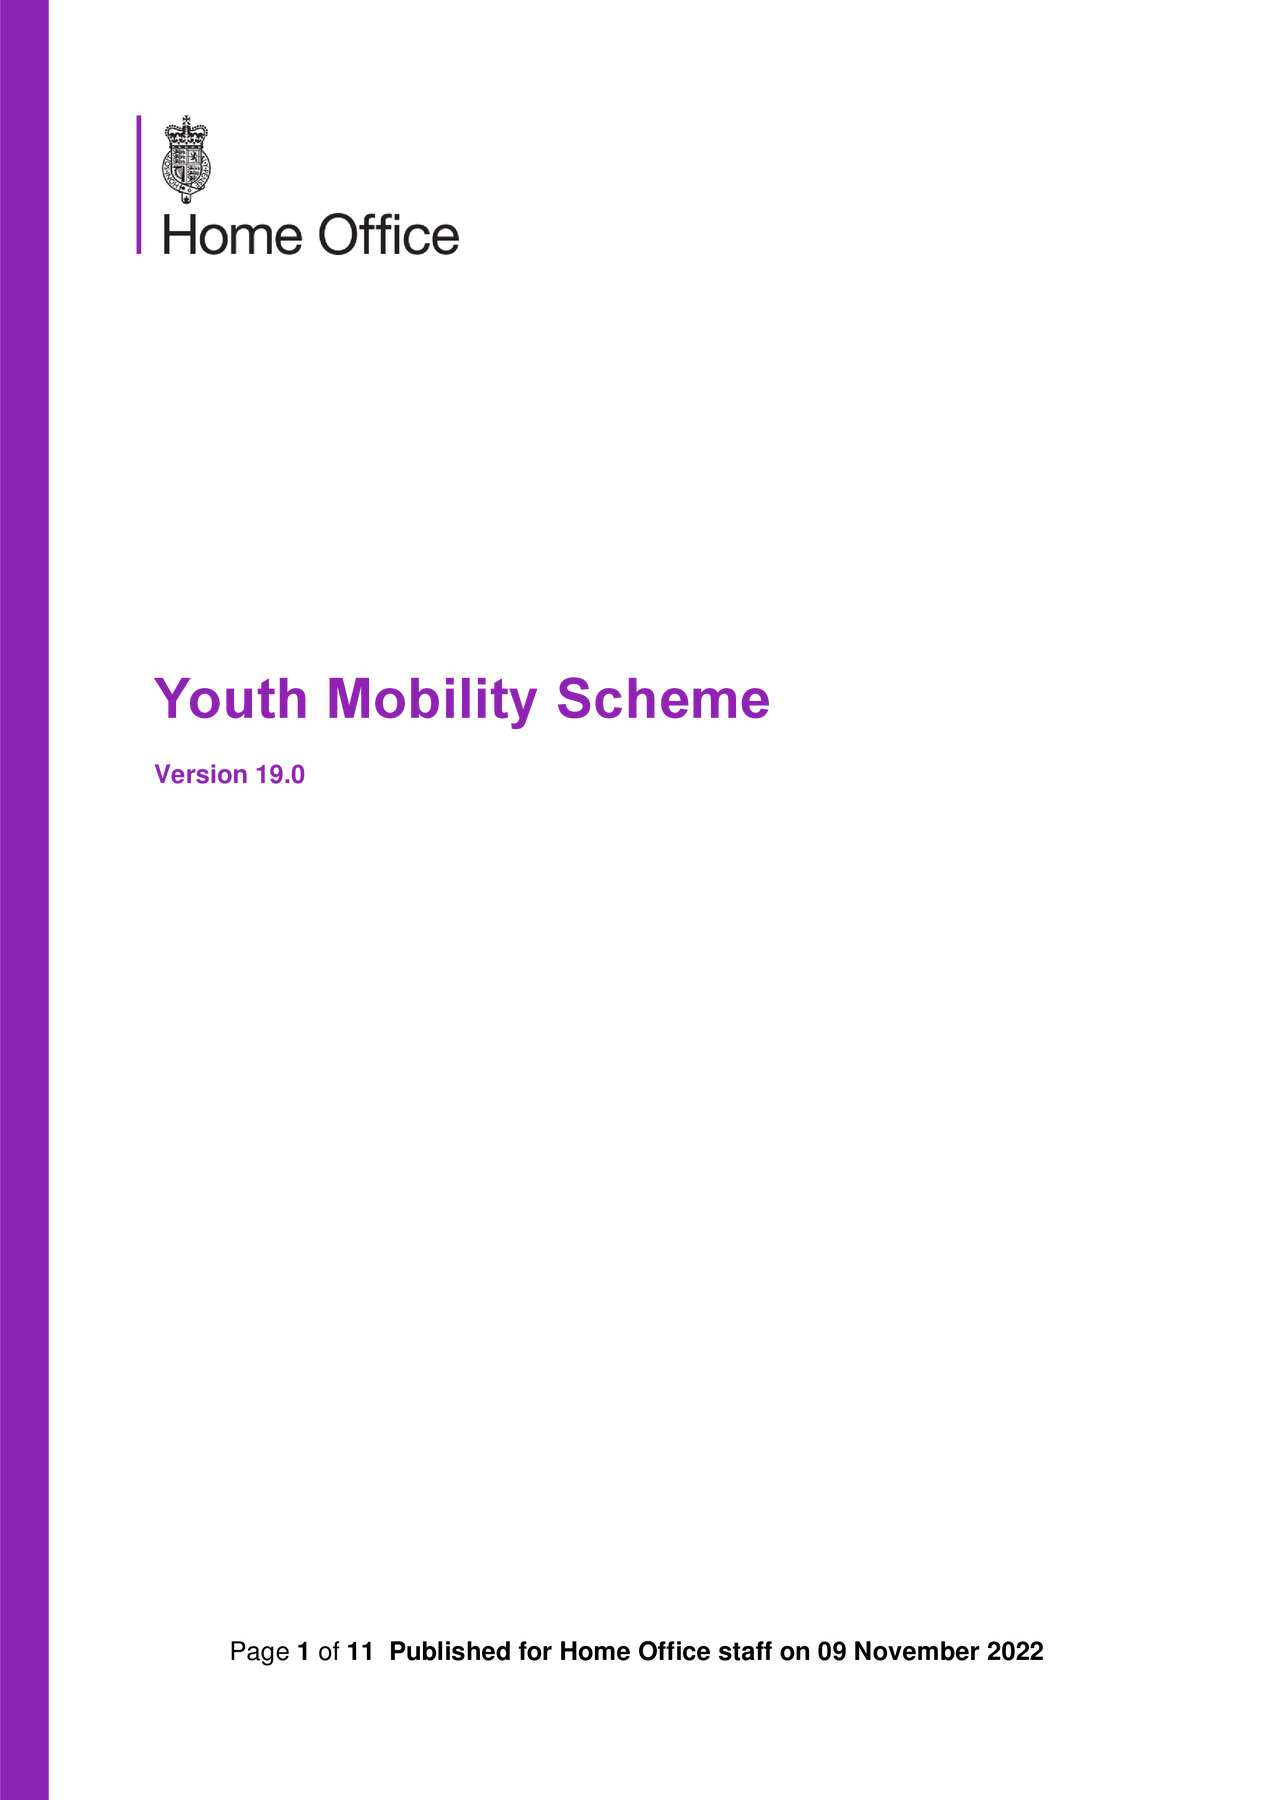 UK India Youth Mobility Scheme Guidelines PDF